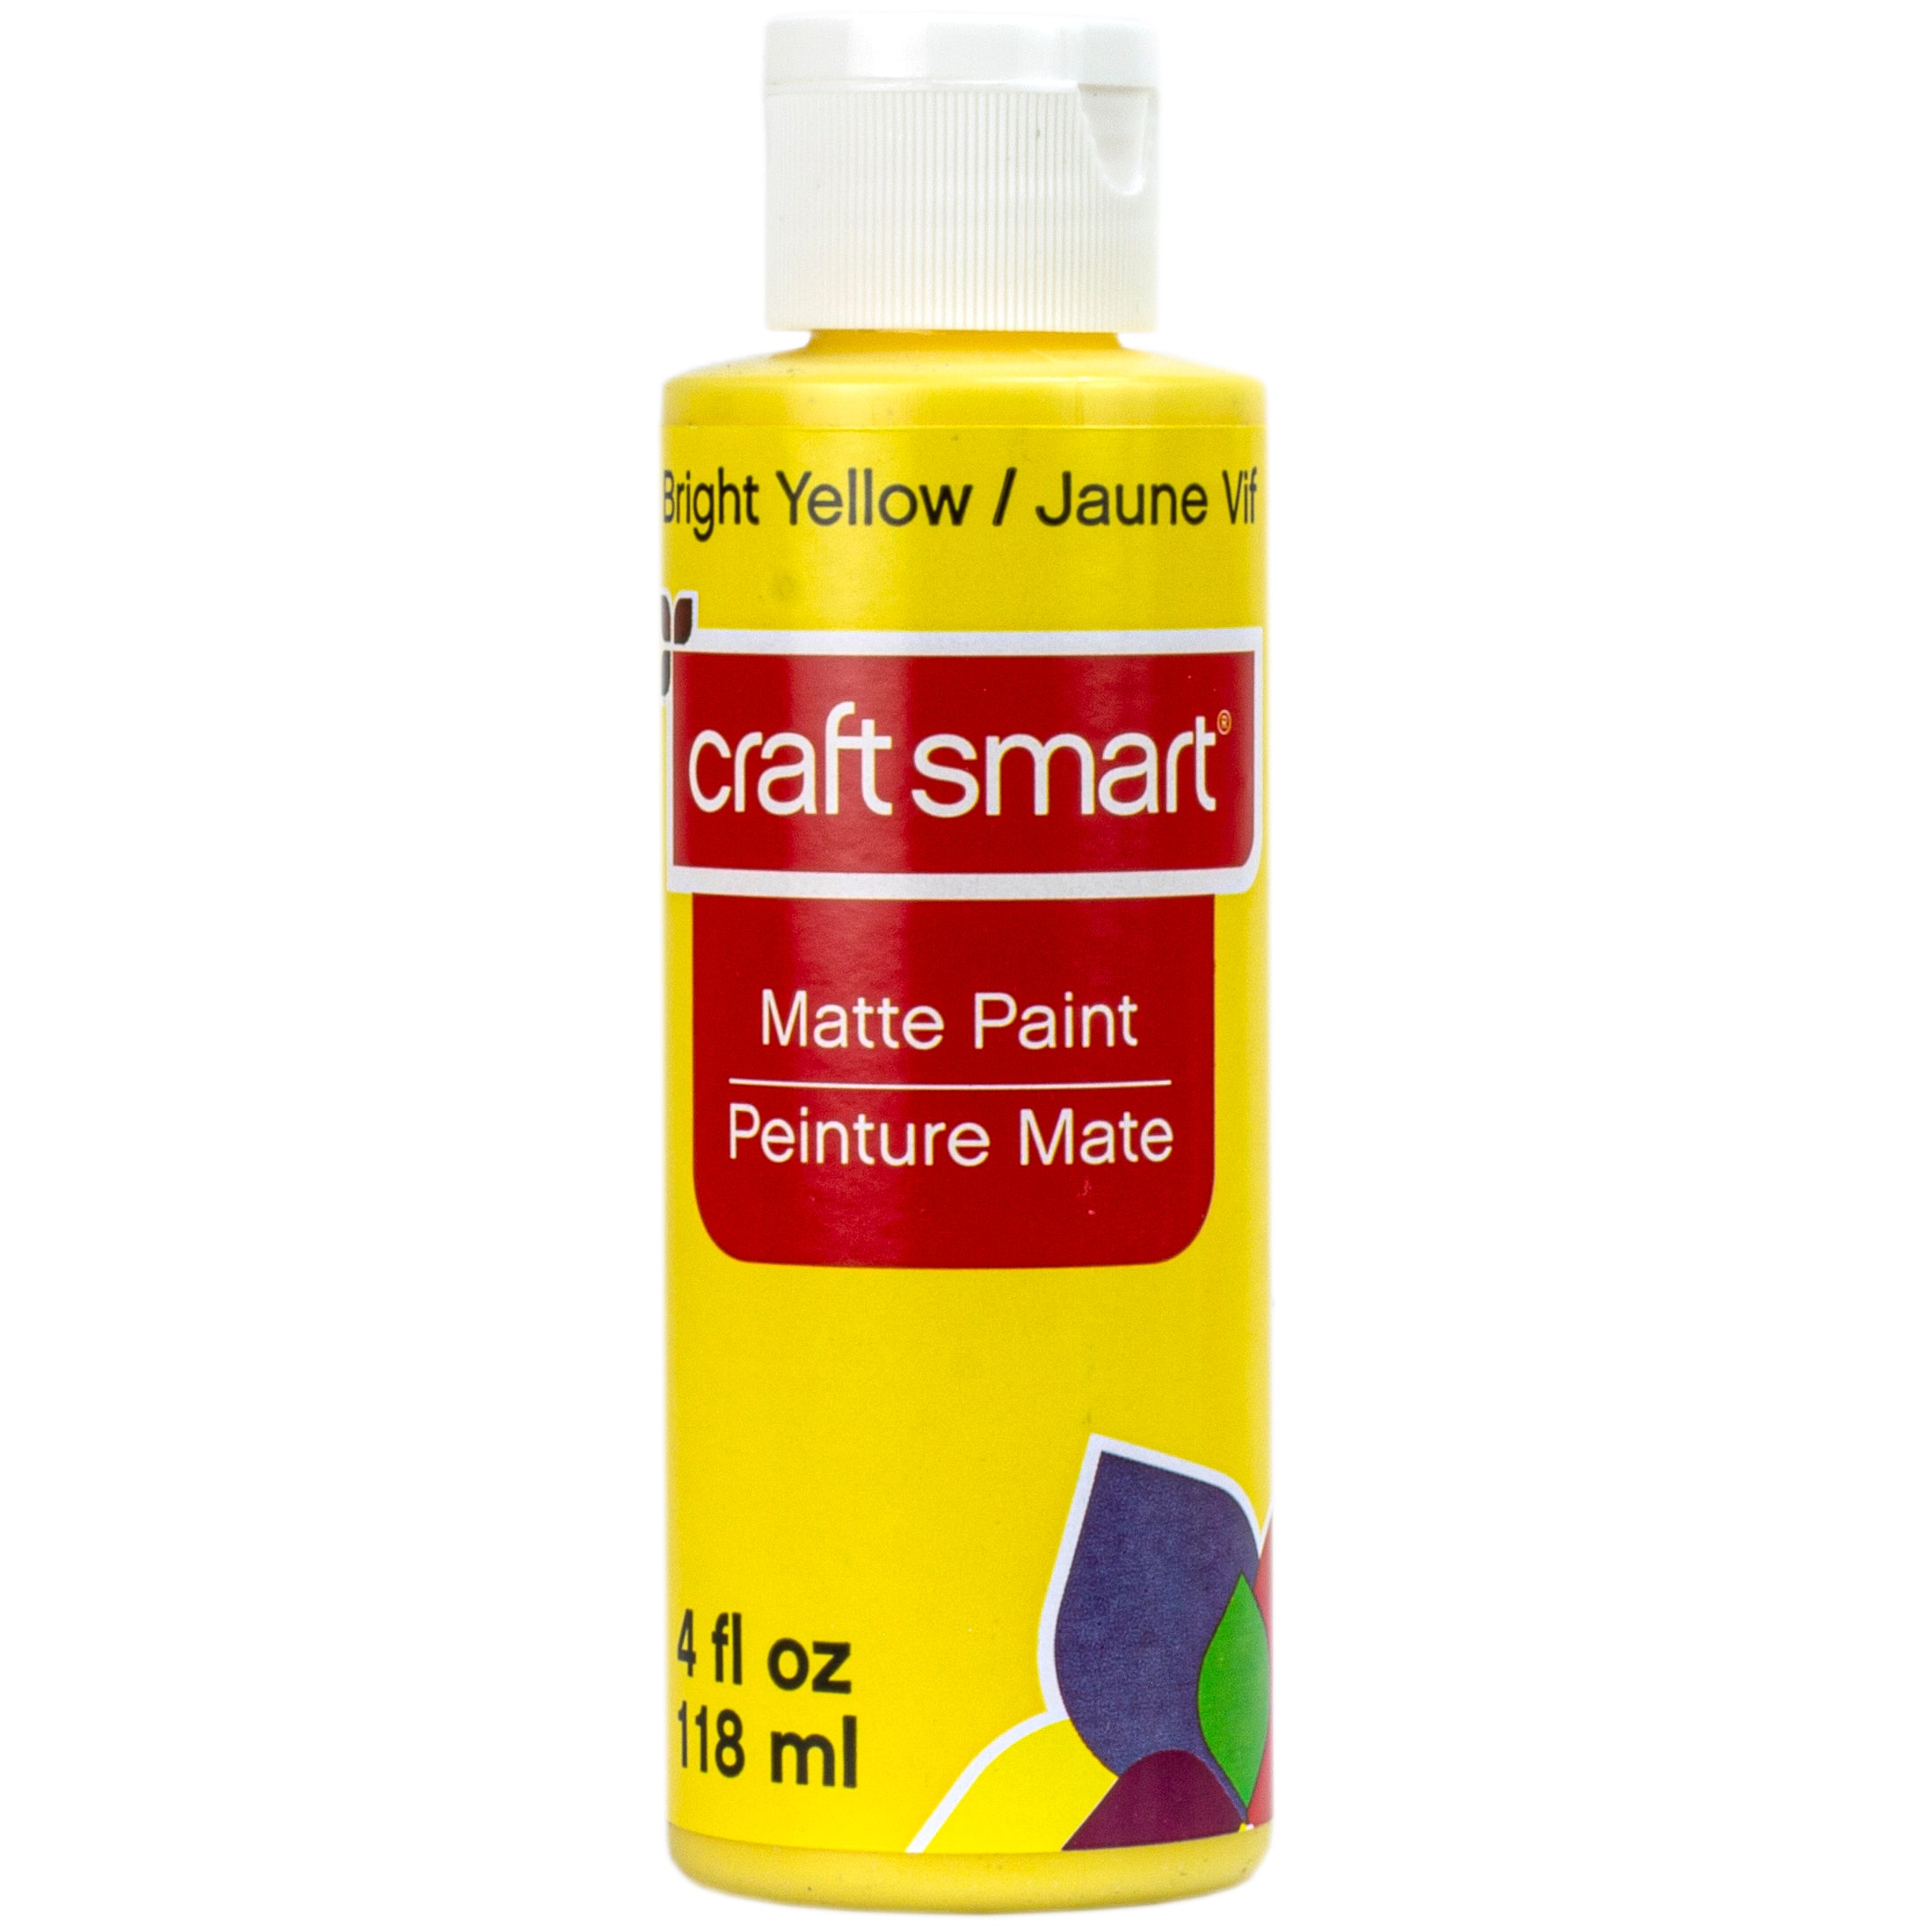 Matte Acrylic Paint by Craft Smart 16 oz in Black | Michaels